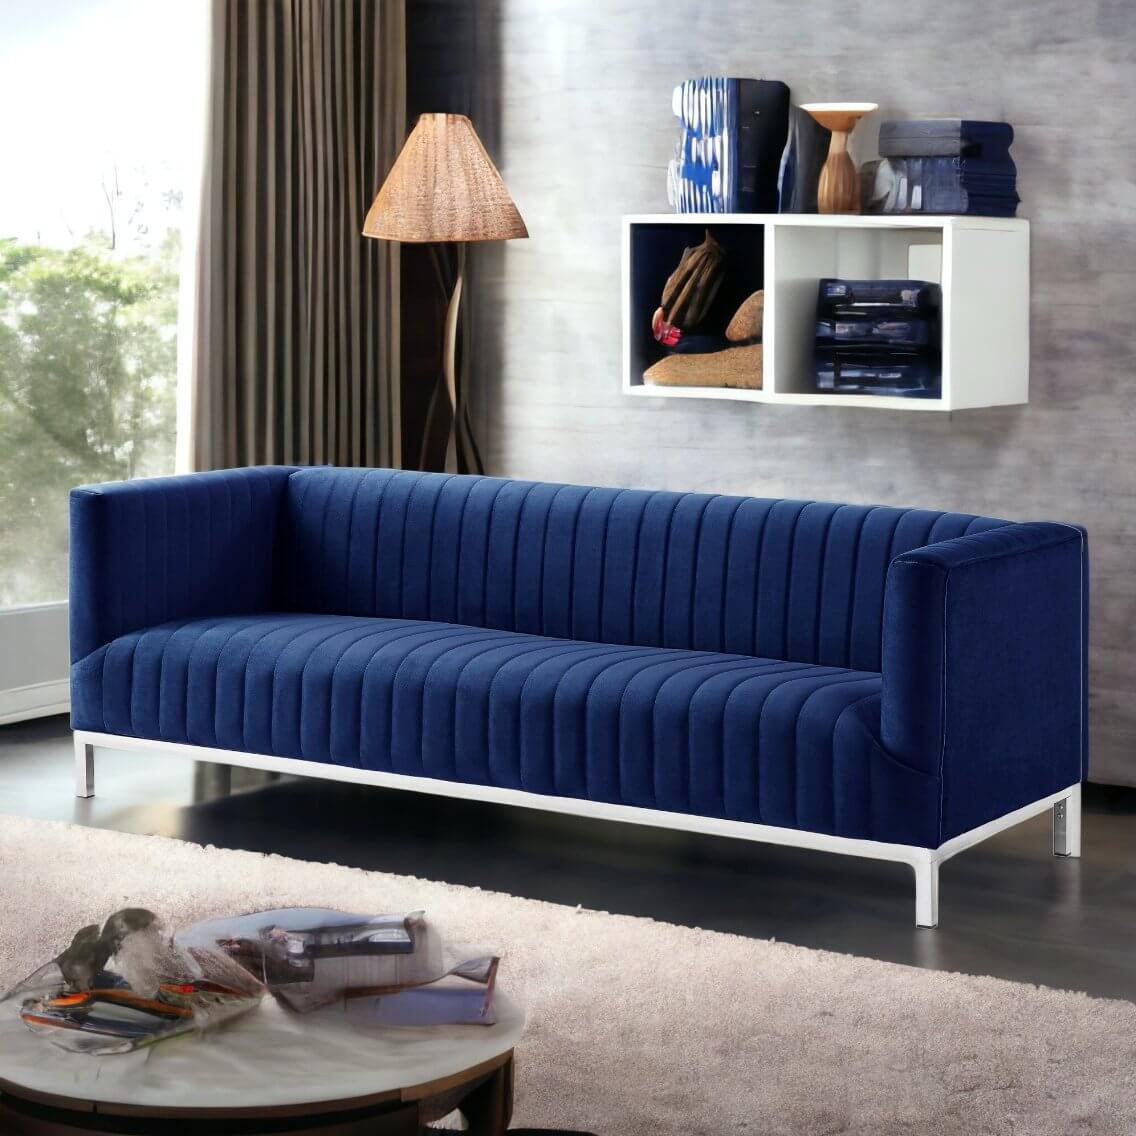 Channel Tufted Art Deco Luxurious Navy Blue Velvet And Silver Trim Sofa 85"